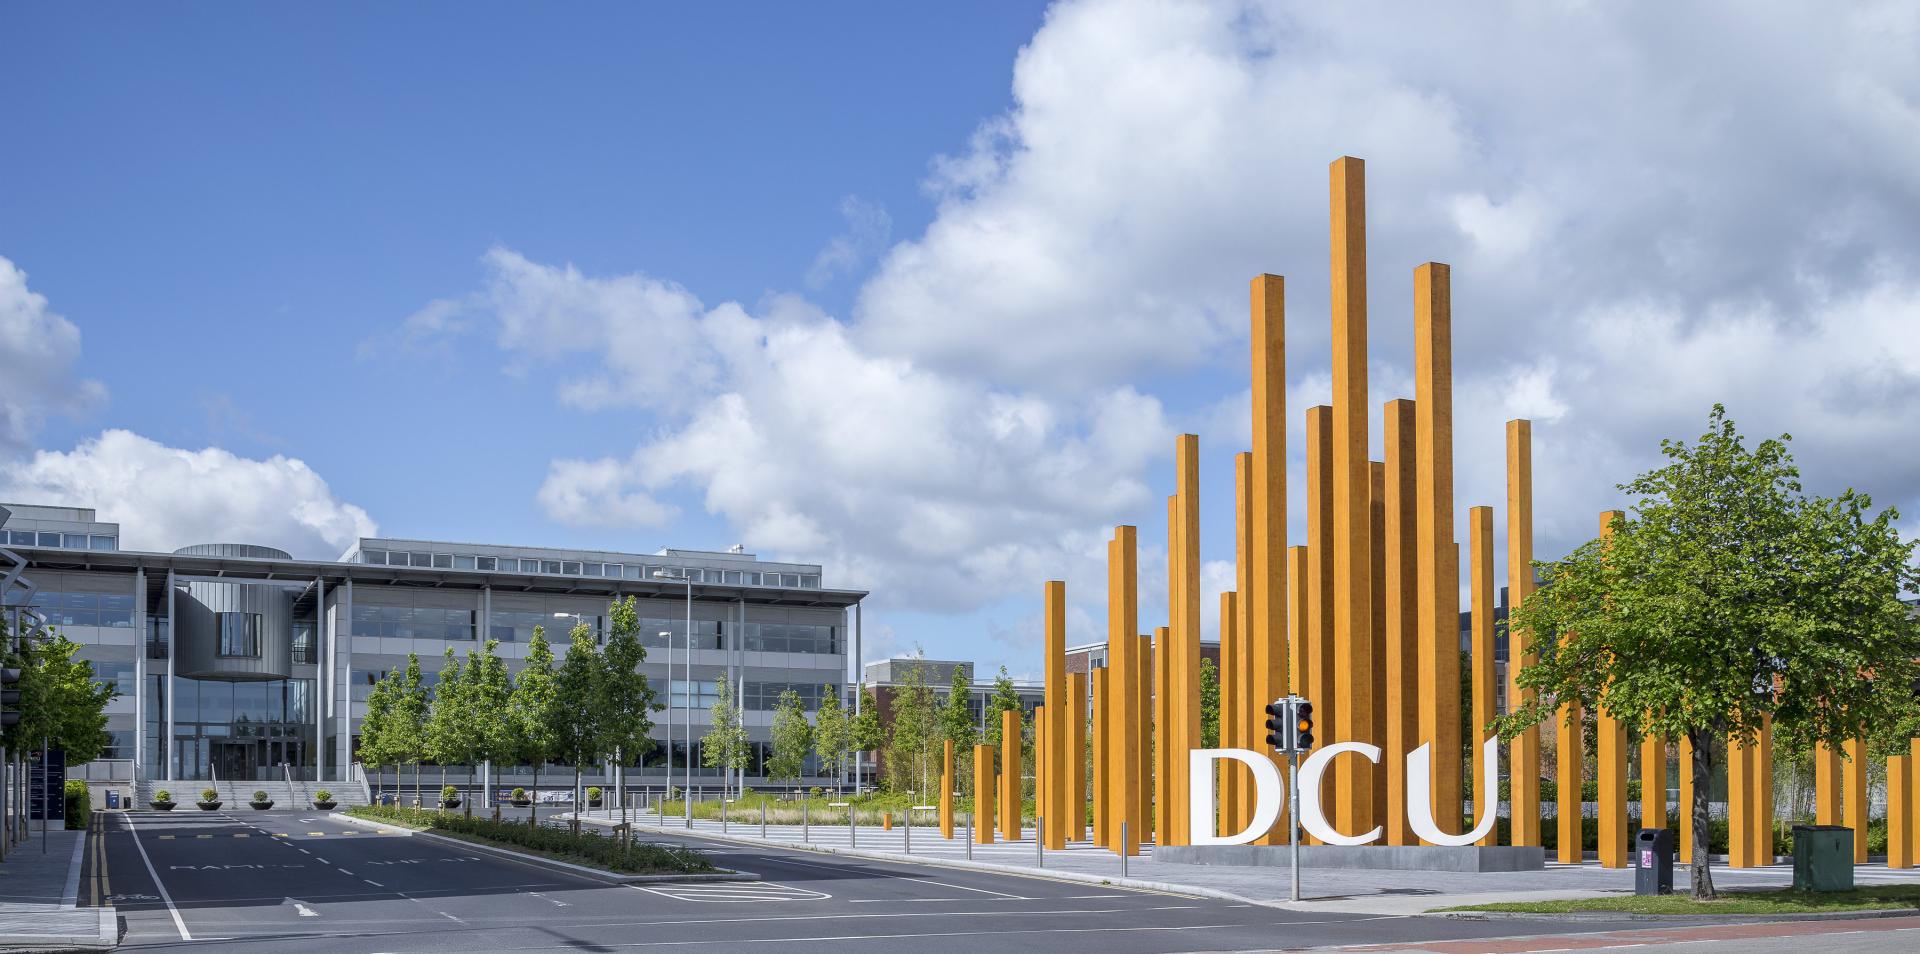 Former UCD President says funding for Ireland's Higher Education is a 'national crisis' 